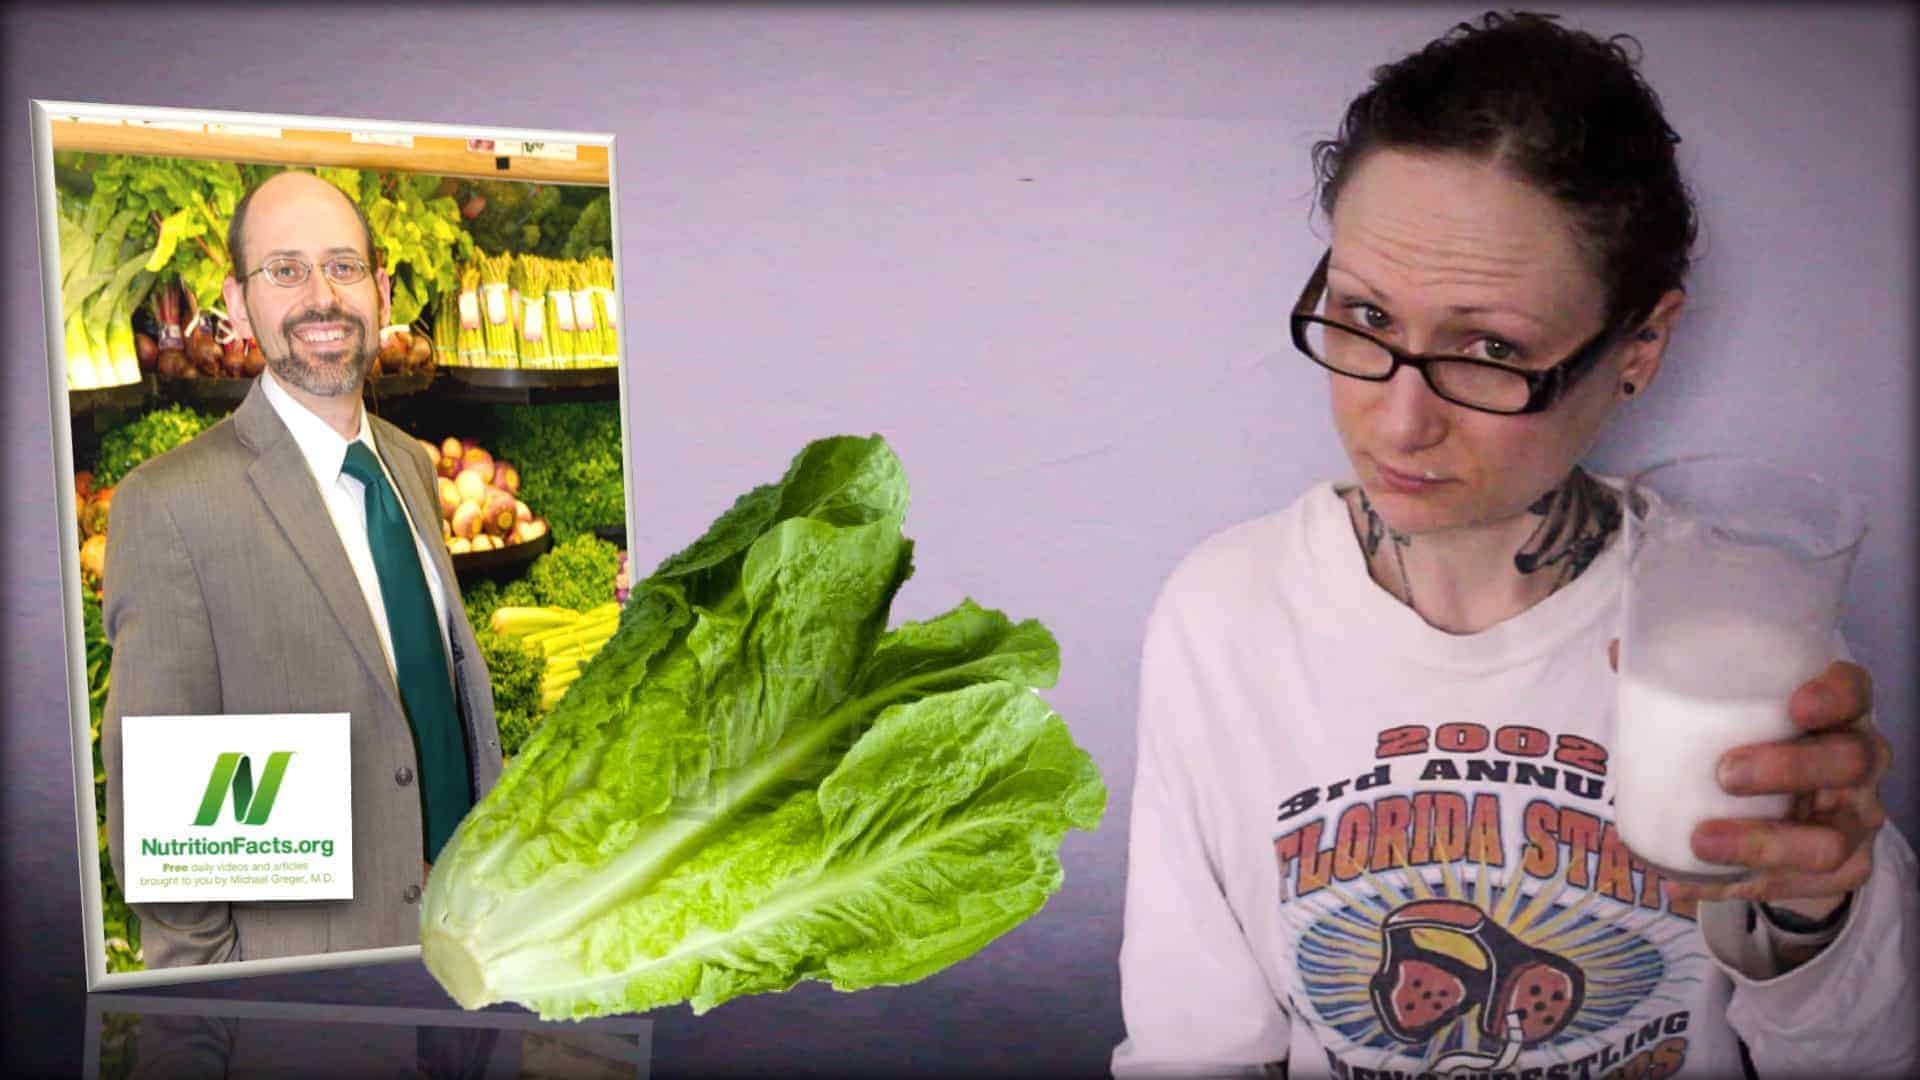 Dr. Greger of NutritionFacts.org is seen as an inset photograph on the left. In the center is an image of a vibrant lettuce. On the right is an image of Emily Moran Barwick of Bite Size Vegan holding a glass of milk.